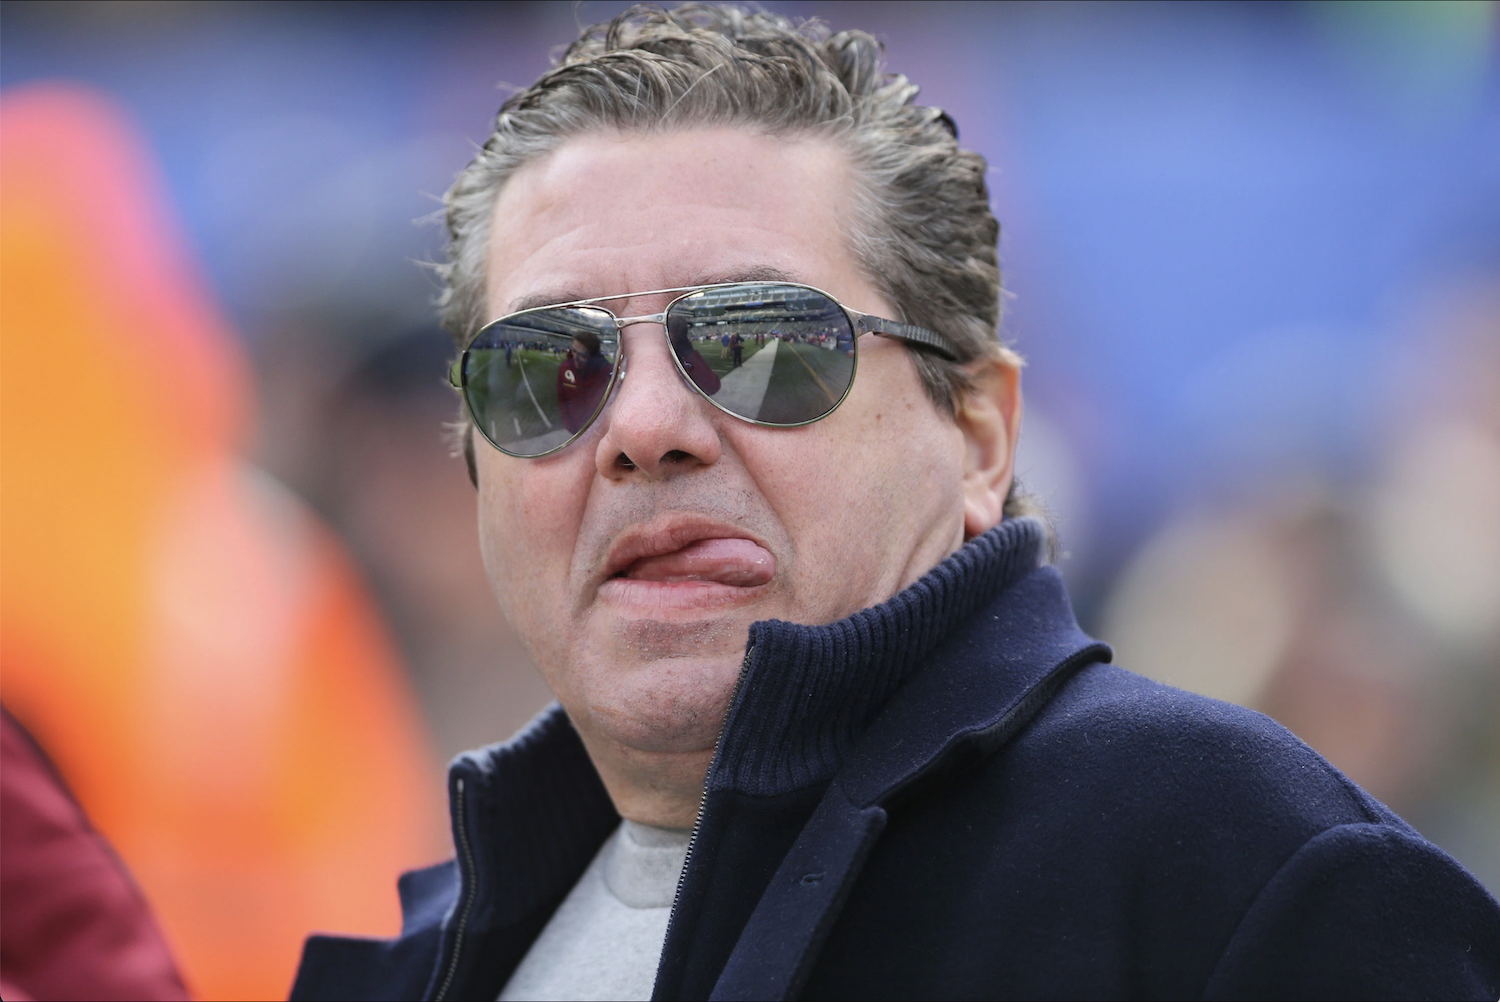 Dan Snyder sticks out his disgusting tongue.